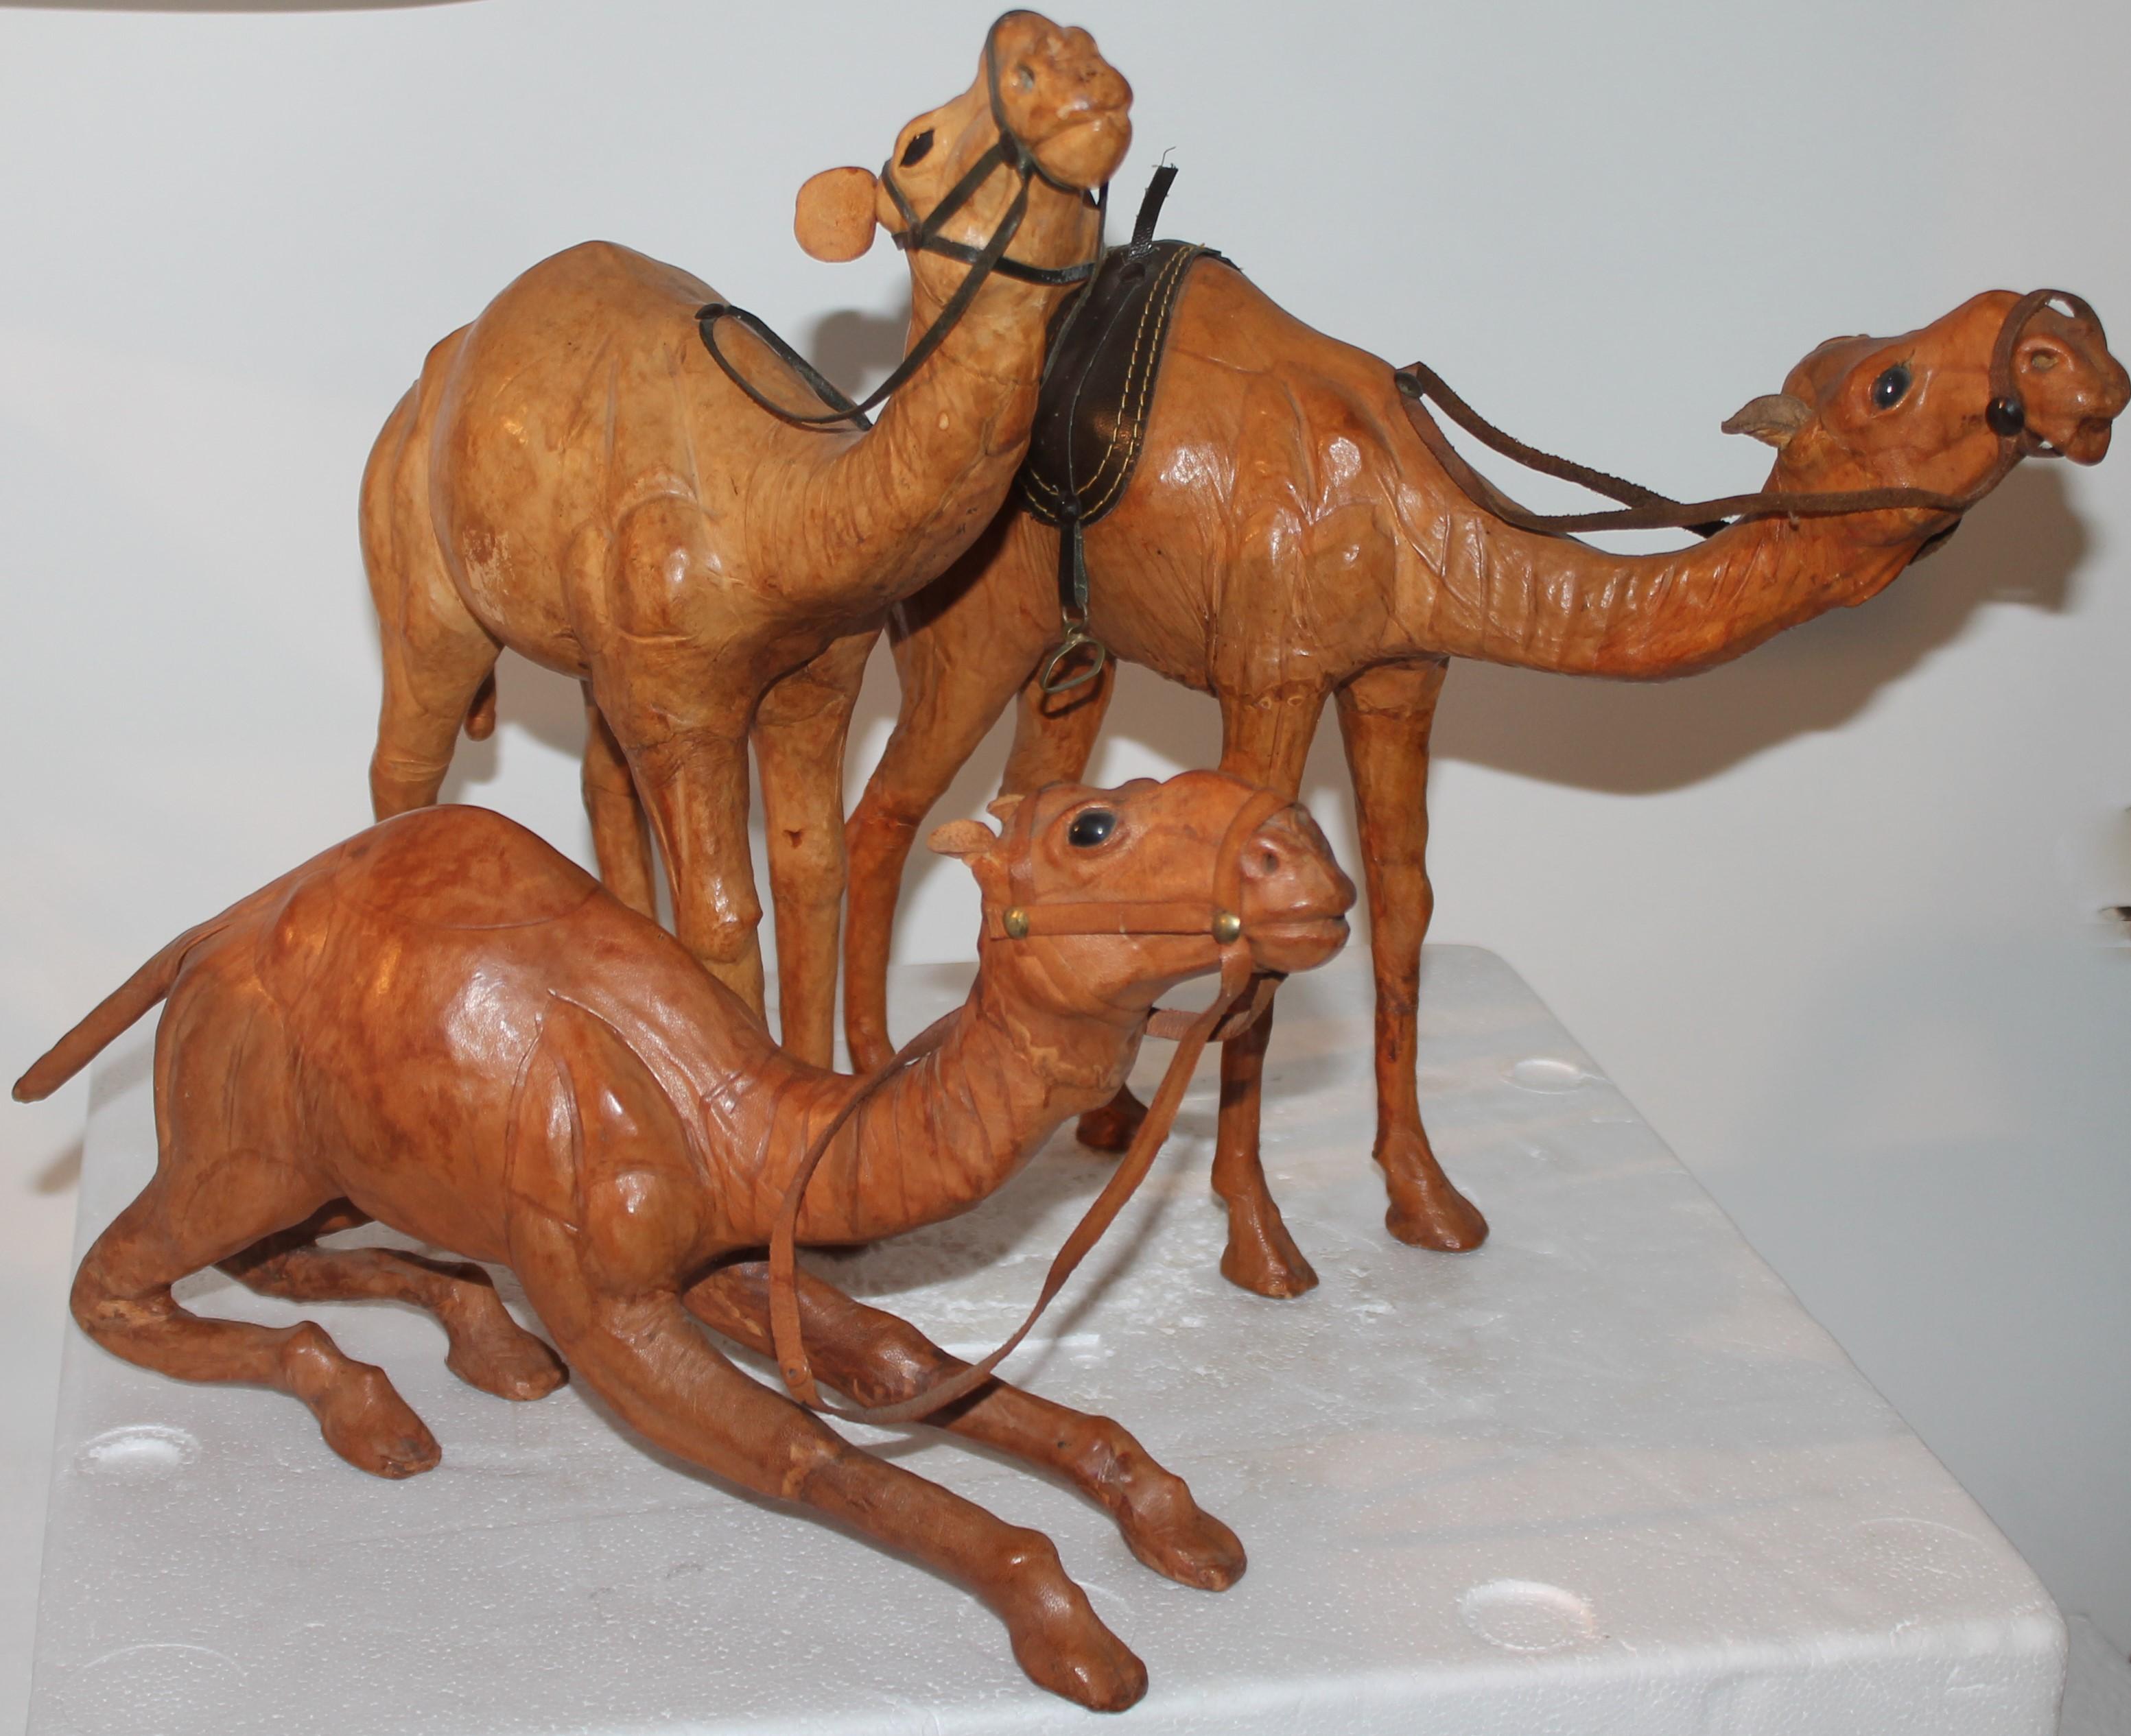 These three hand made leather camels are in fine condition and are sold as a collection of three. They look like the three wise men's camels. All in very good condition.

Measures: 14H x 12W x 2.5 
12H x 15W x 2.5
8H x 13 W x 3.